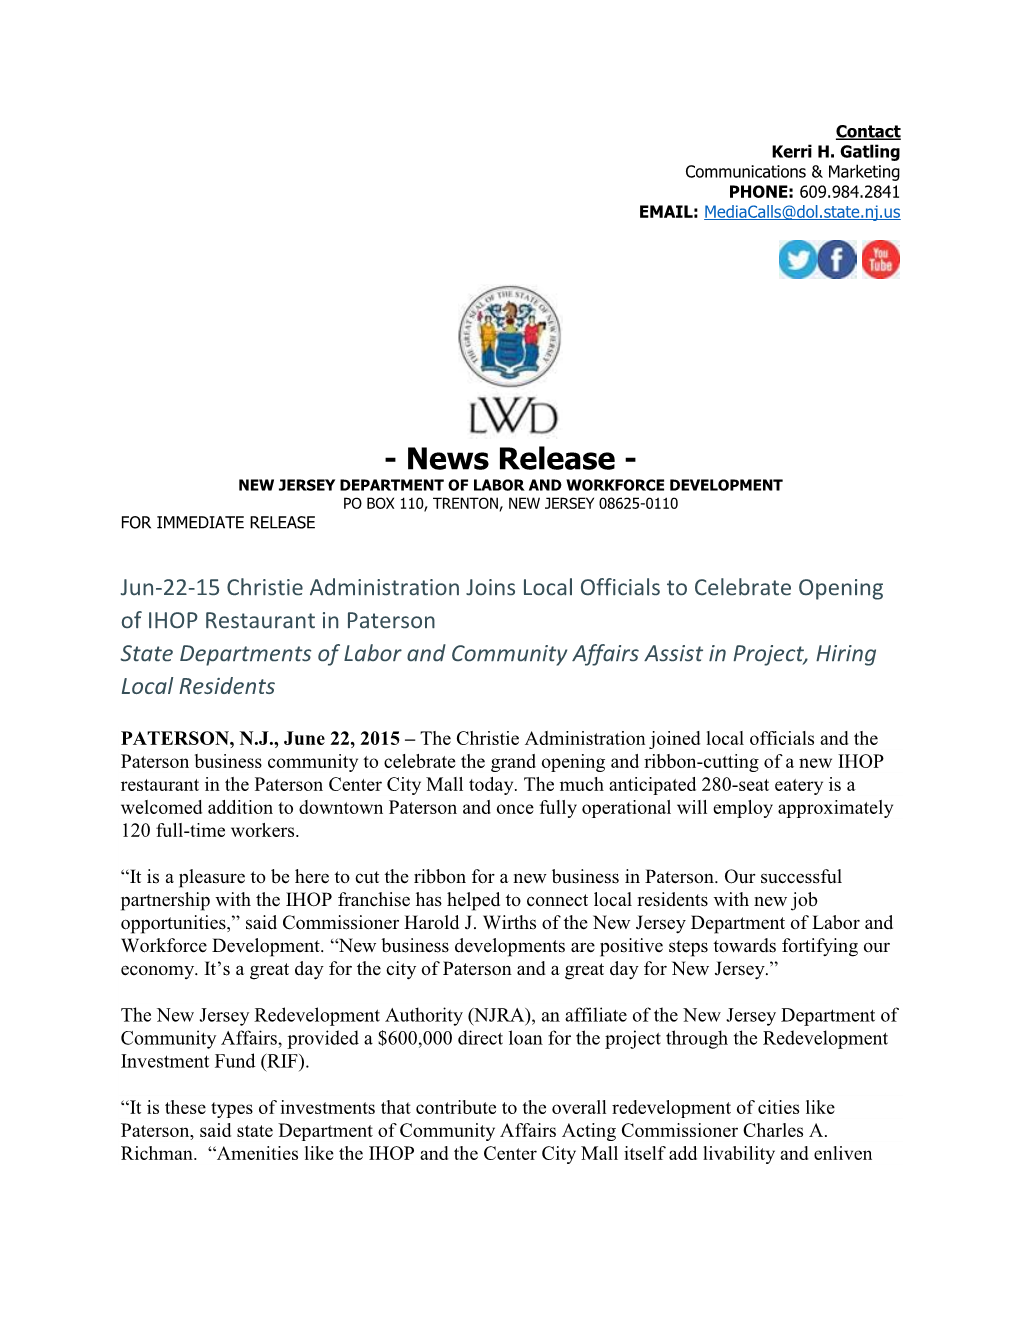 News Release - NEW JERSEY DEPARTMENT of LABOR and WORKFORCE DEVELOPMENT PO BOX 110, TRENTON, NEW JERSEY 08625-0110 for IMMEDIATE RELEASE